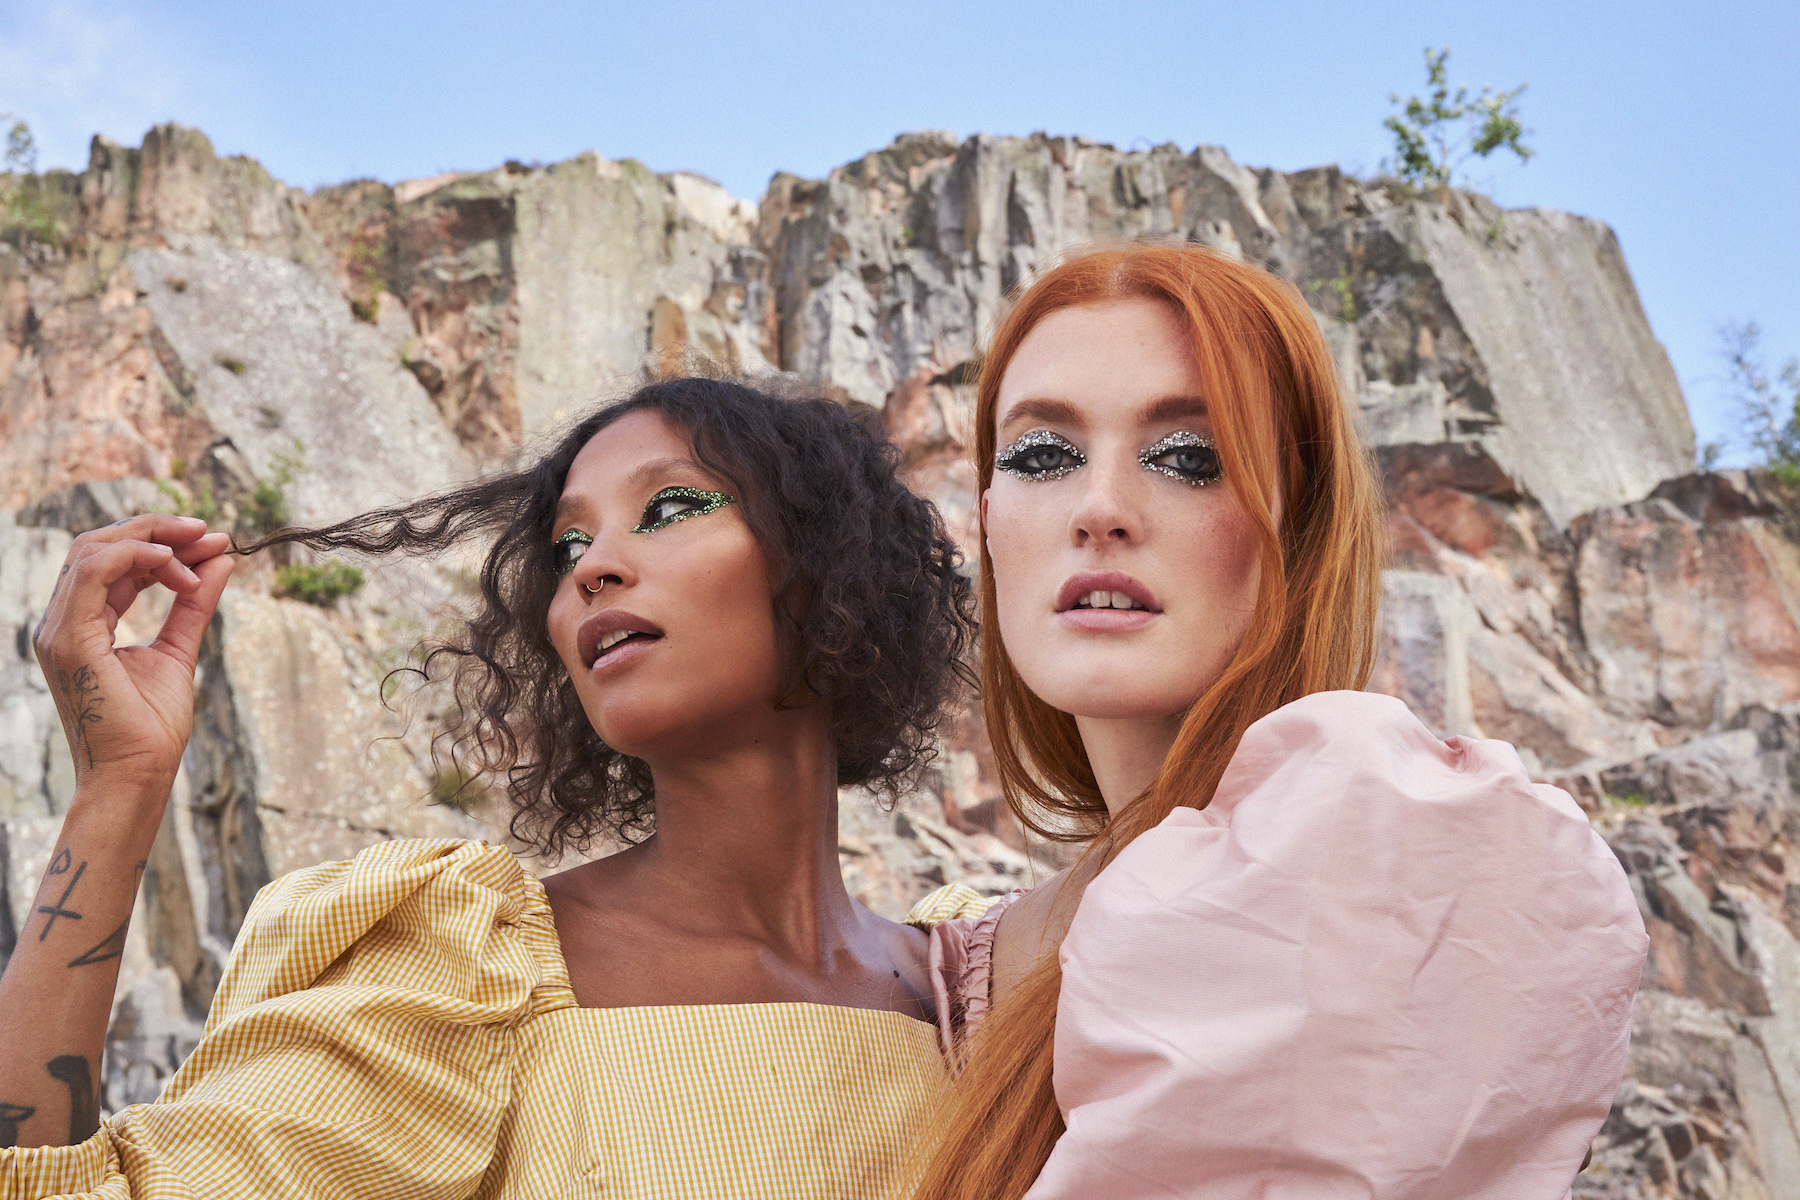 two women who make up Icona Pop pose for close up portrait photo